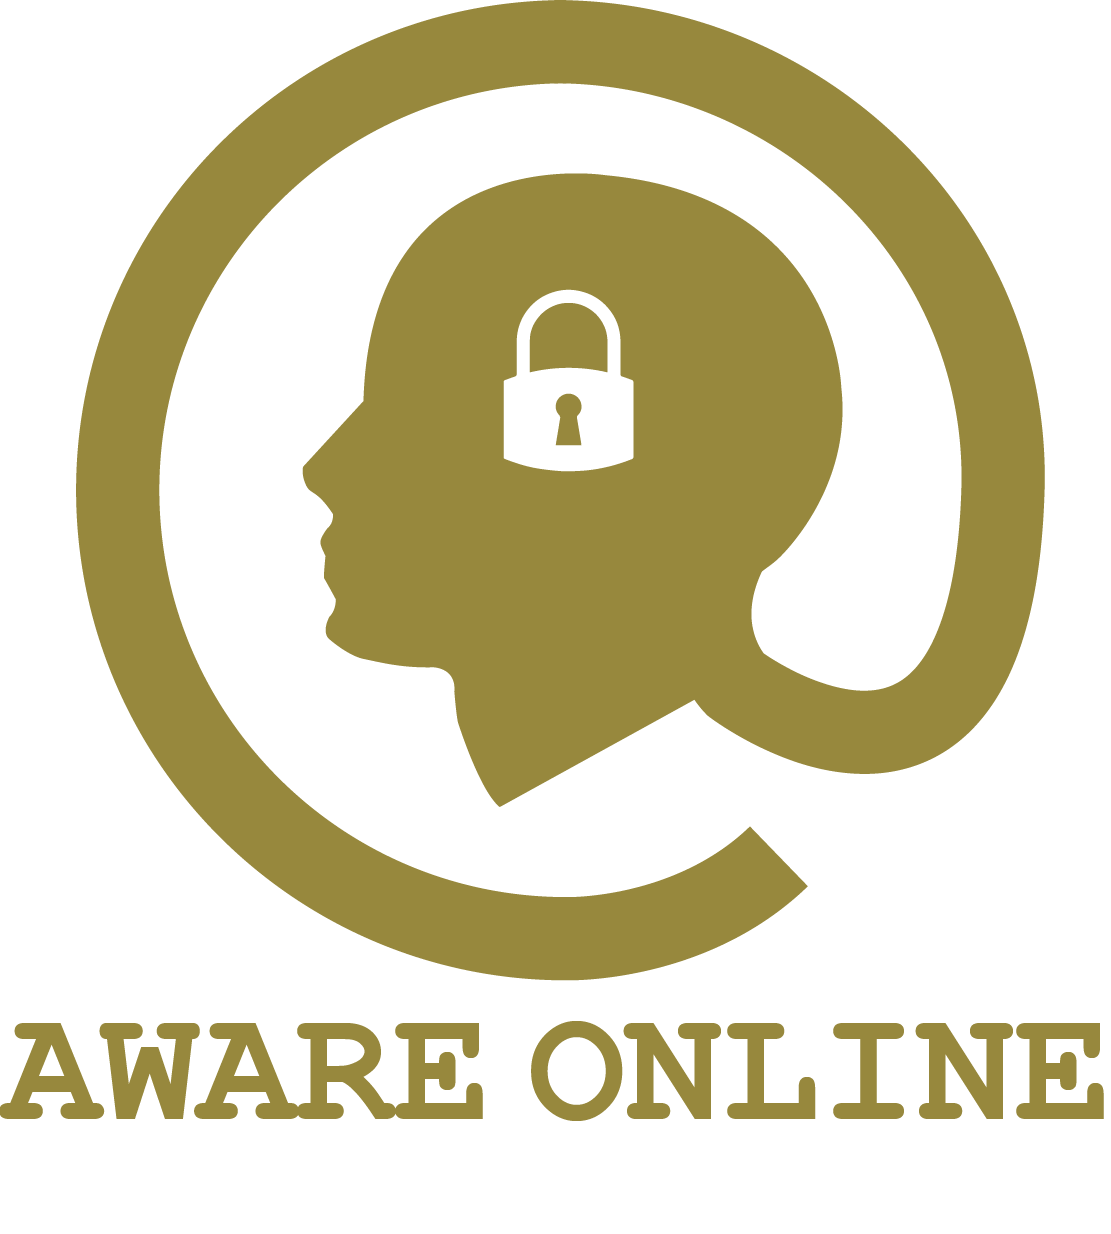 OSINT investigations on Spotify - Aware Online Academy